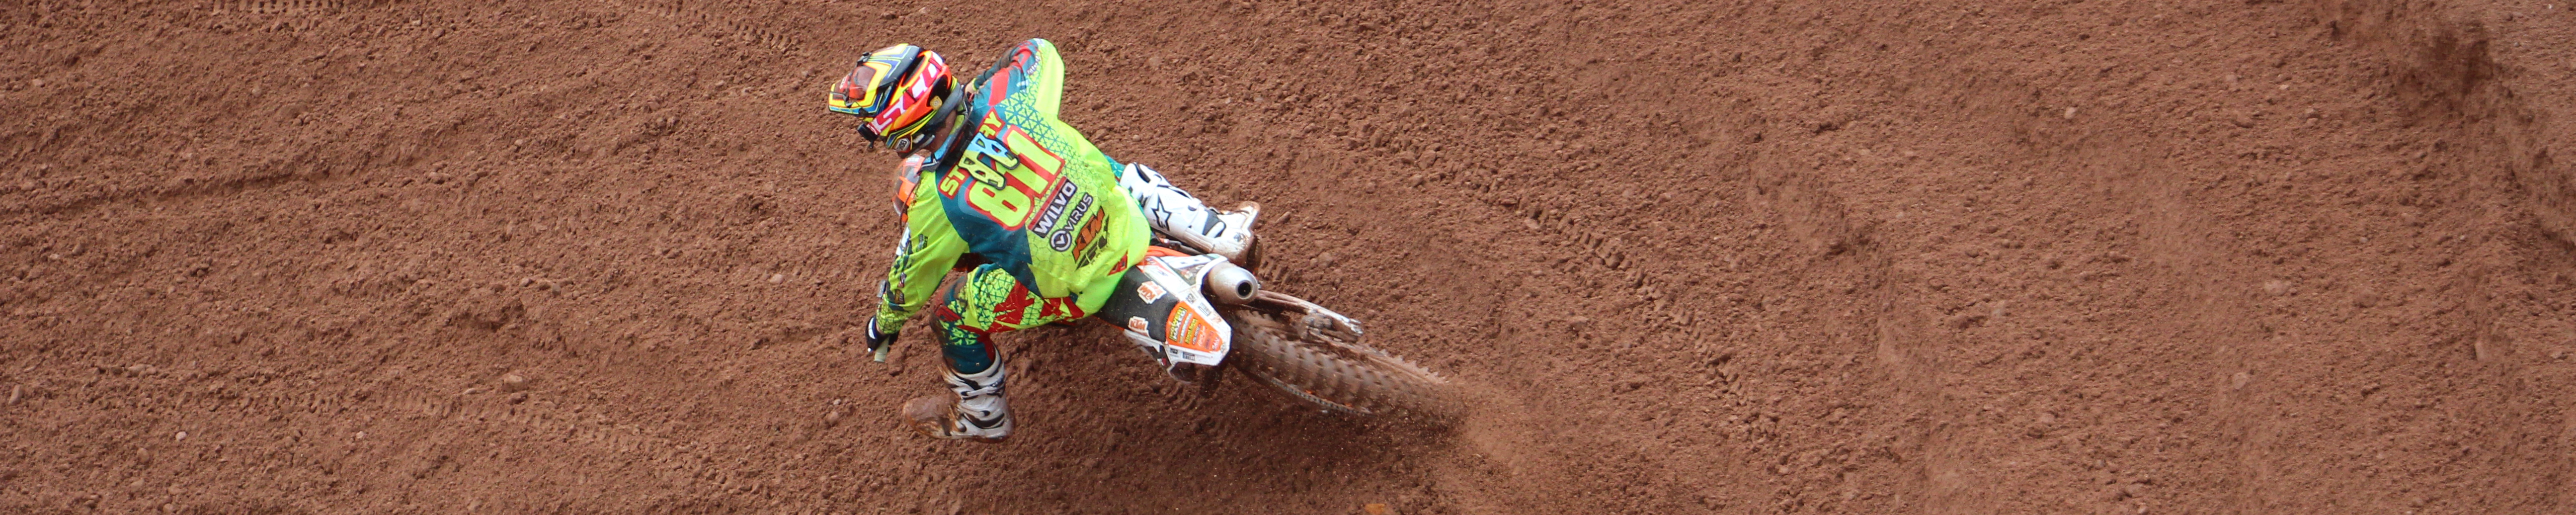 It was a Hard Day’s Night in Liverpool for Apico LPE Kawasaki despite retaining the Red Plate